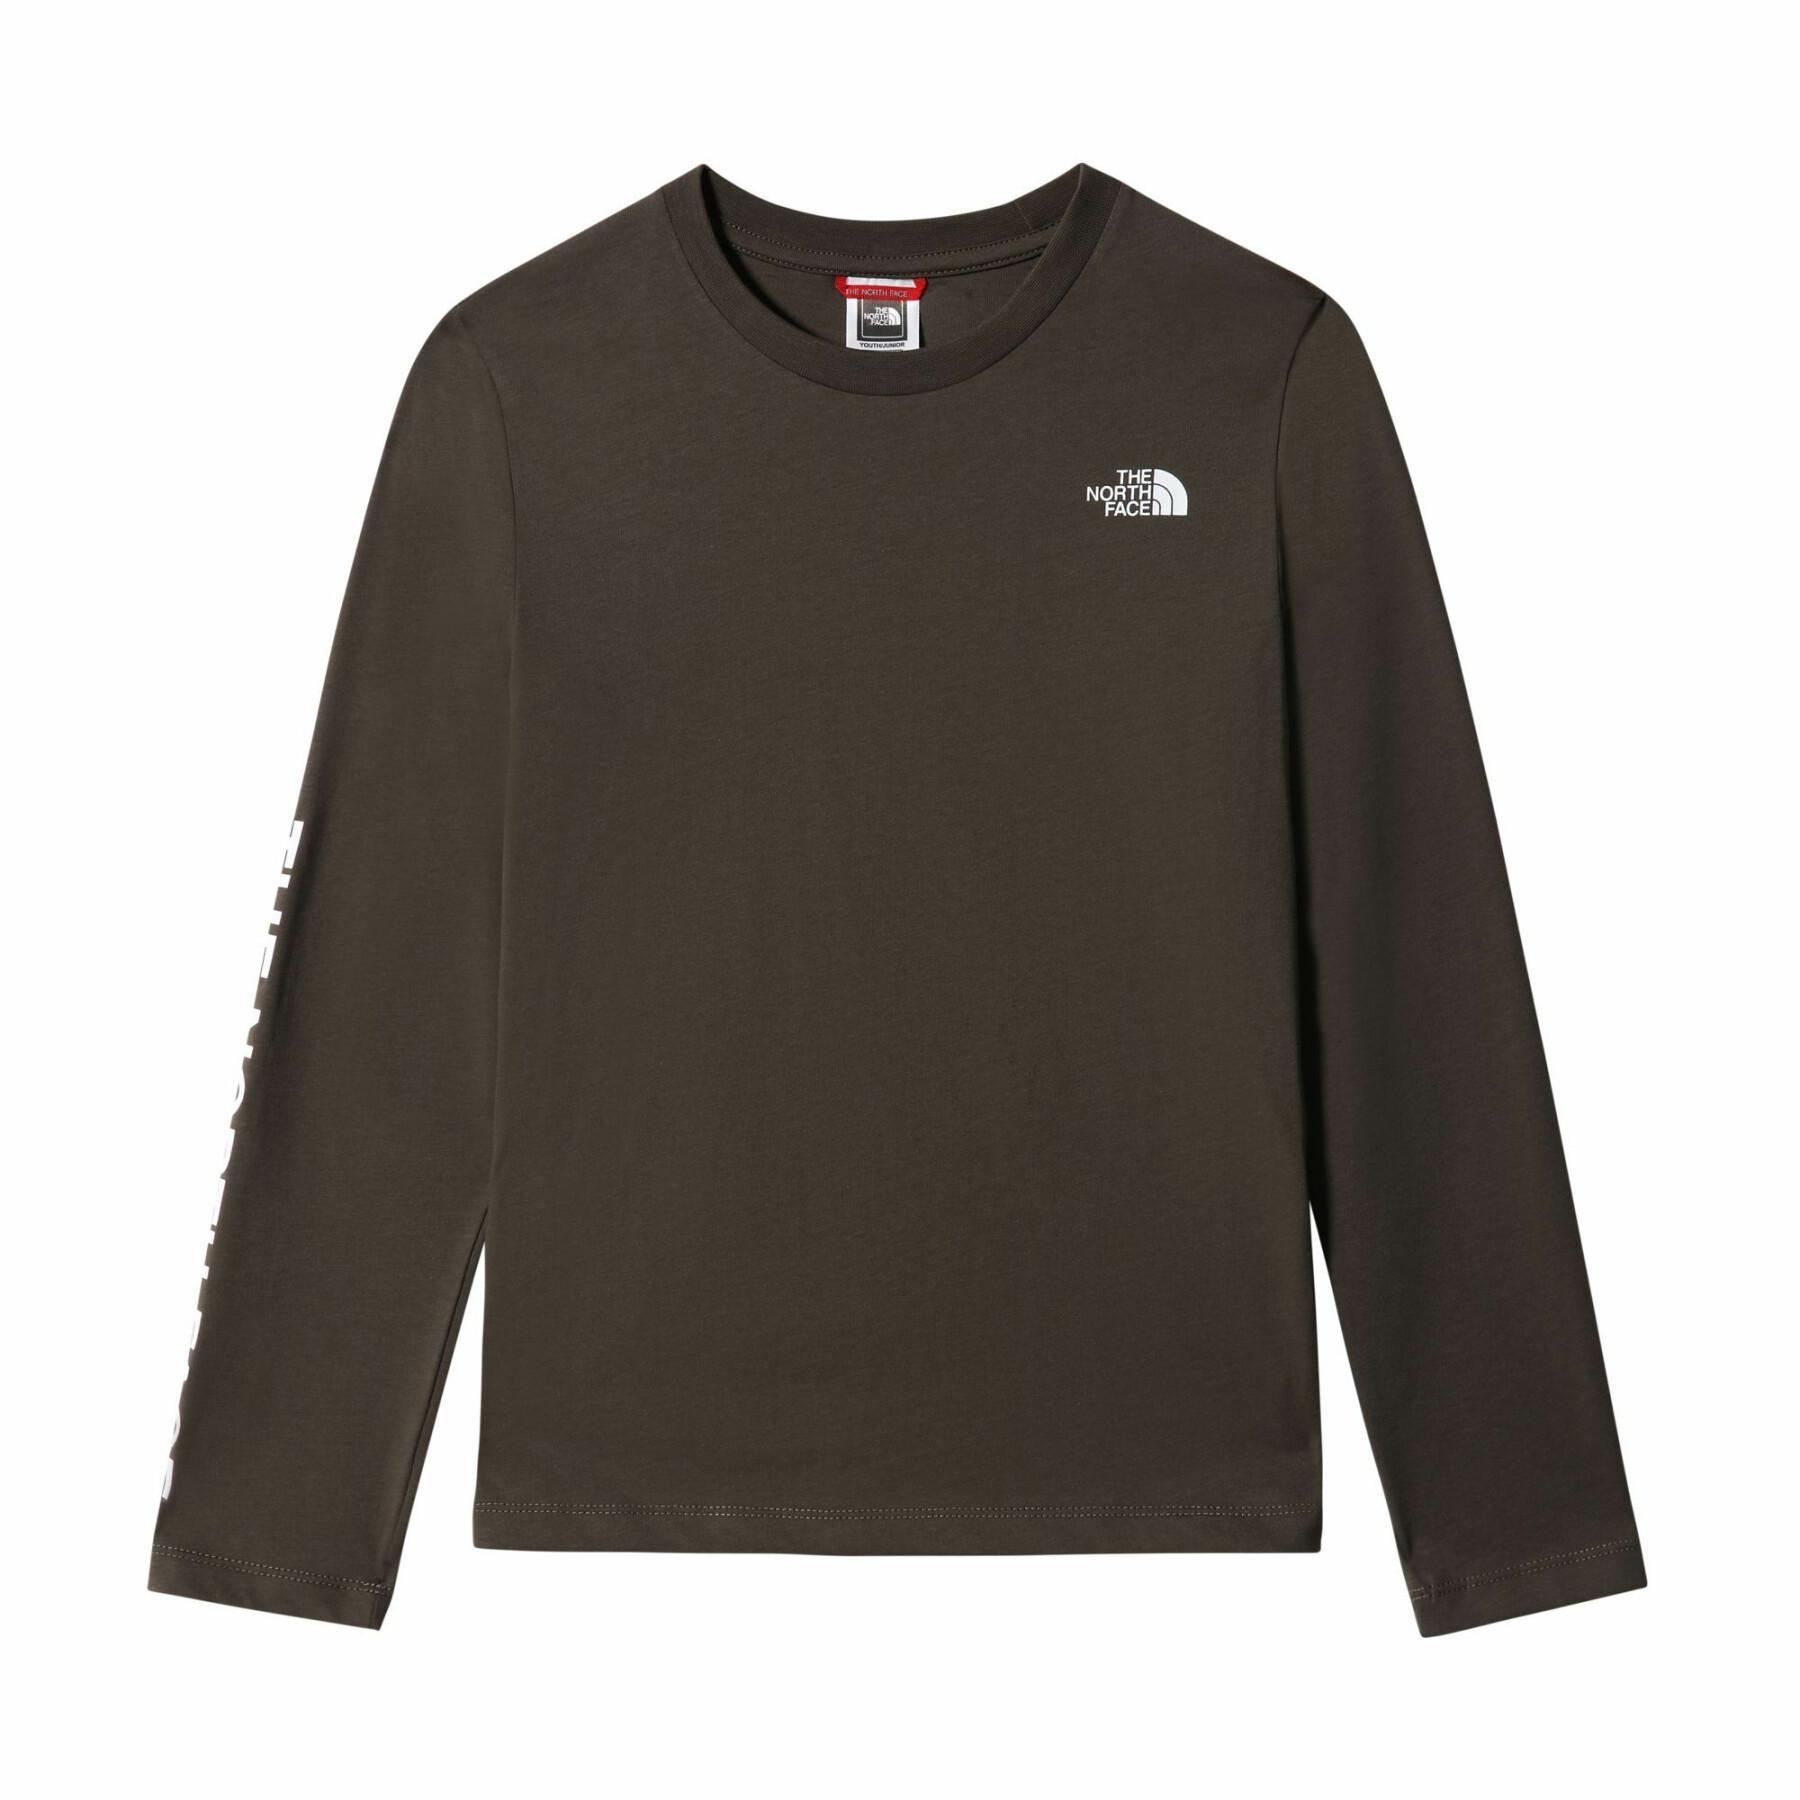 Kinder-T-shirt The North Face Simple Dome